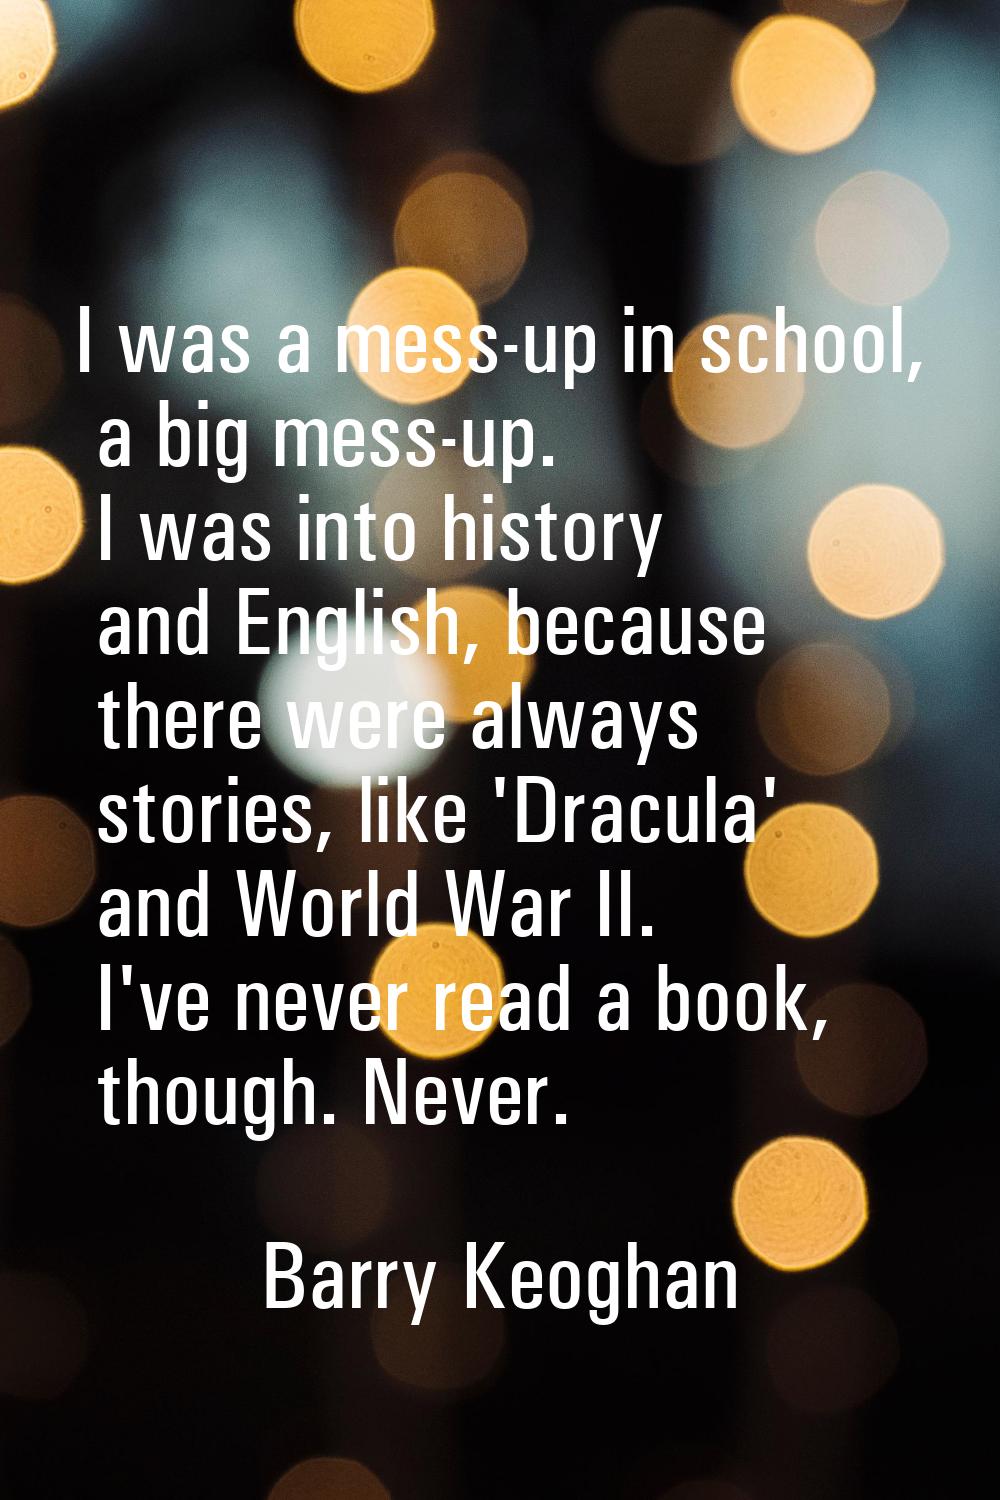 I was a mess-up in school, a big mess-up. I was into history and English, because there were always